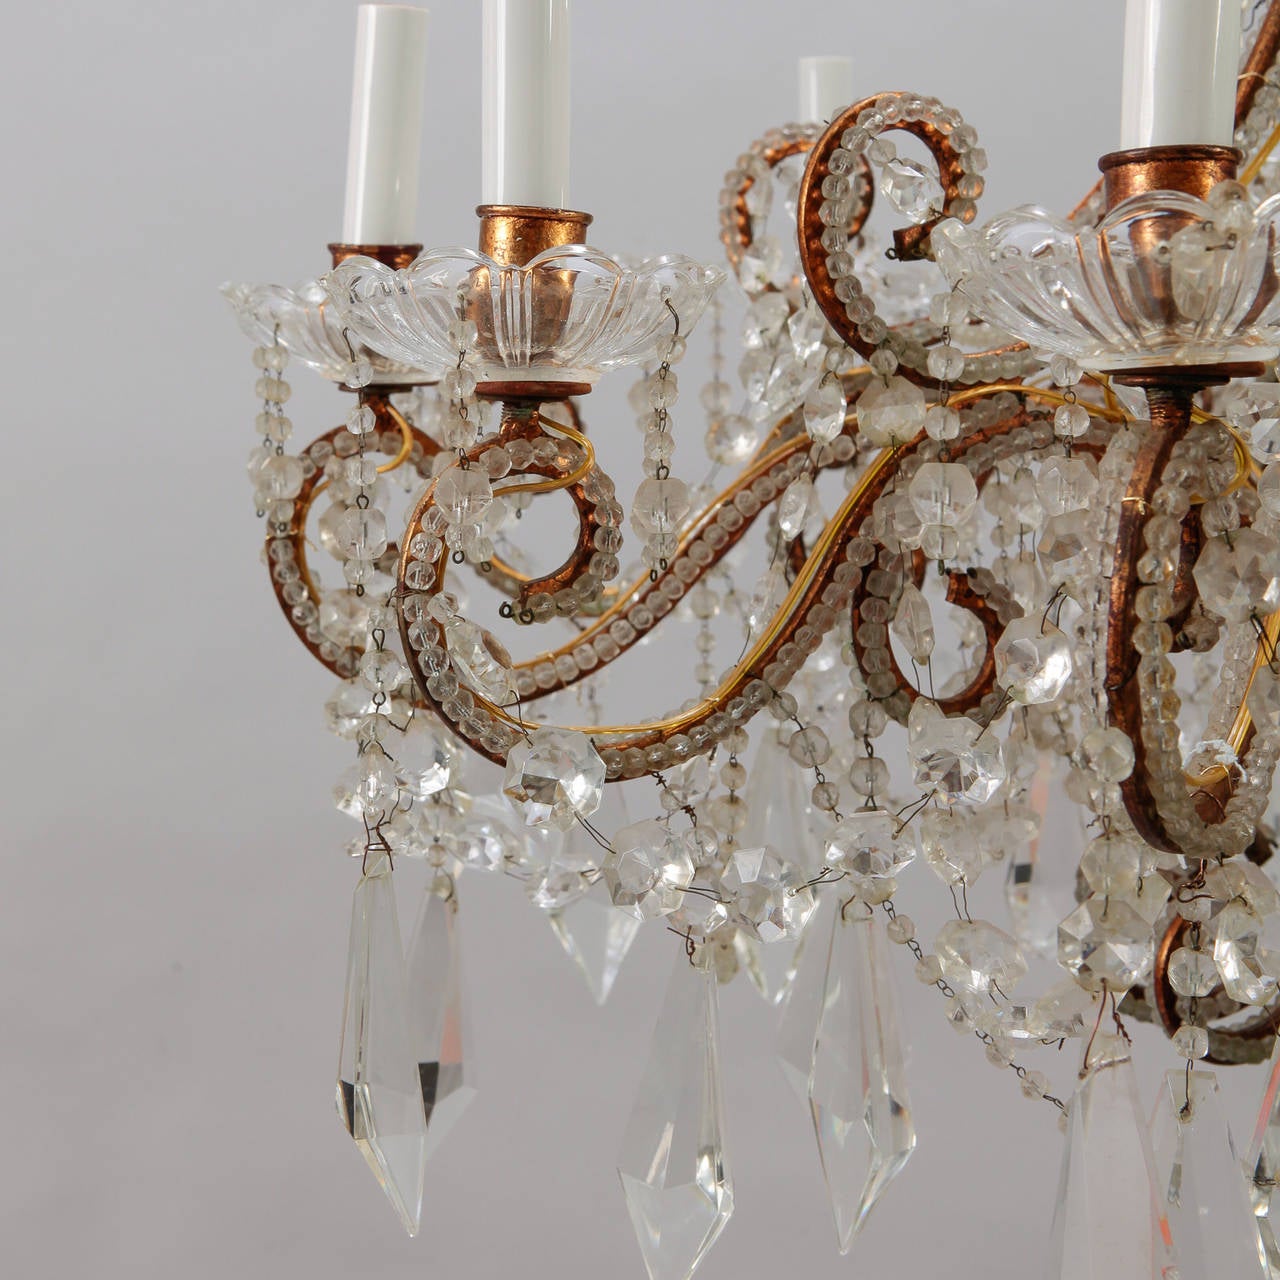 Twelve-Light Italian Crystal Chandelier with Large Drops and Lots of Beading 6